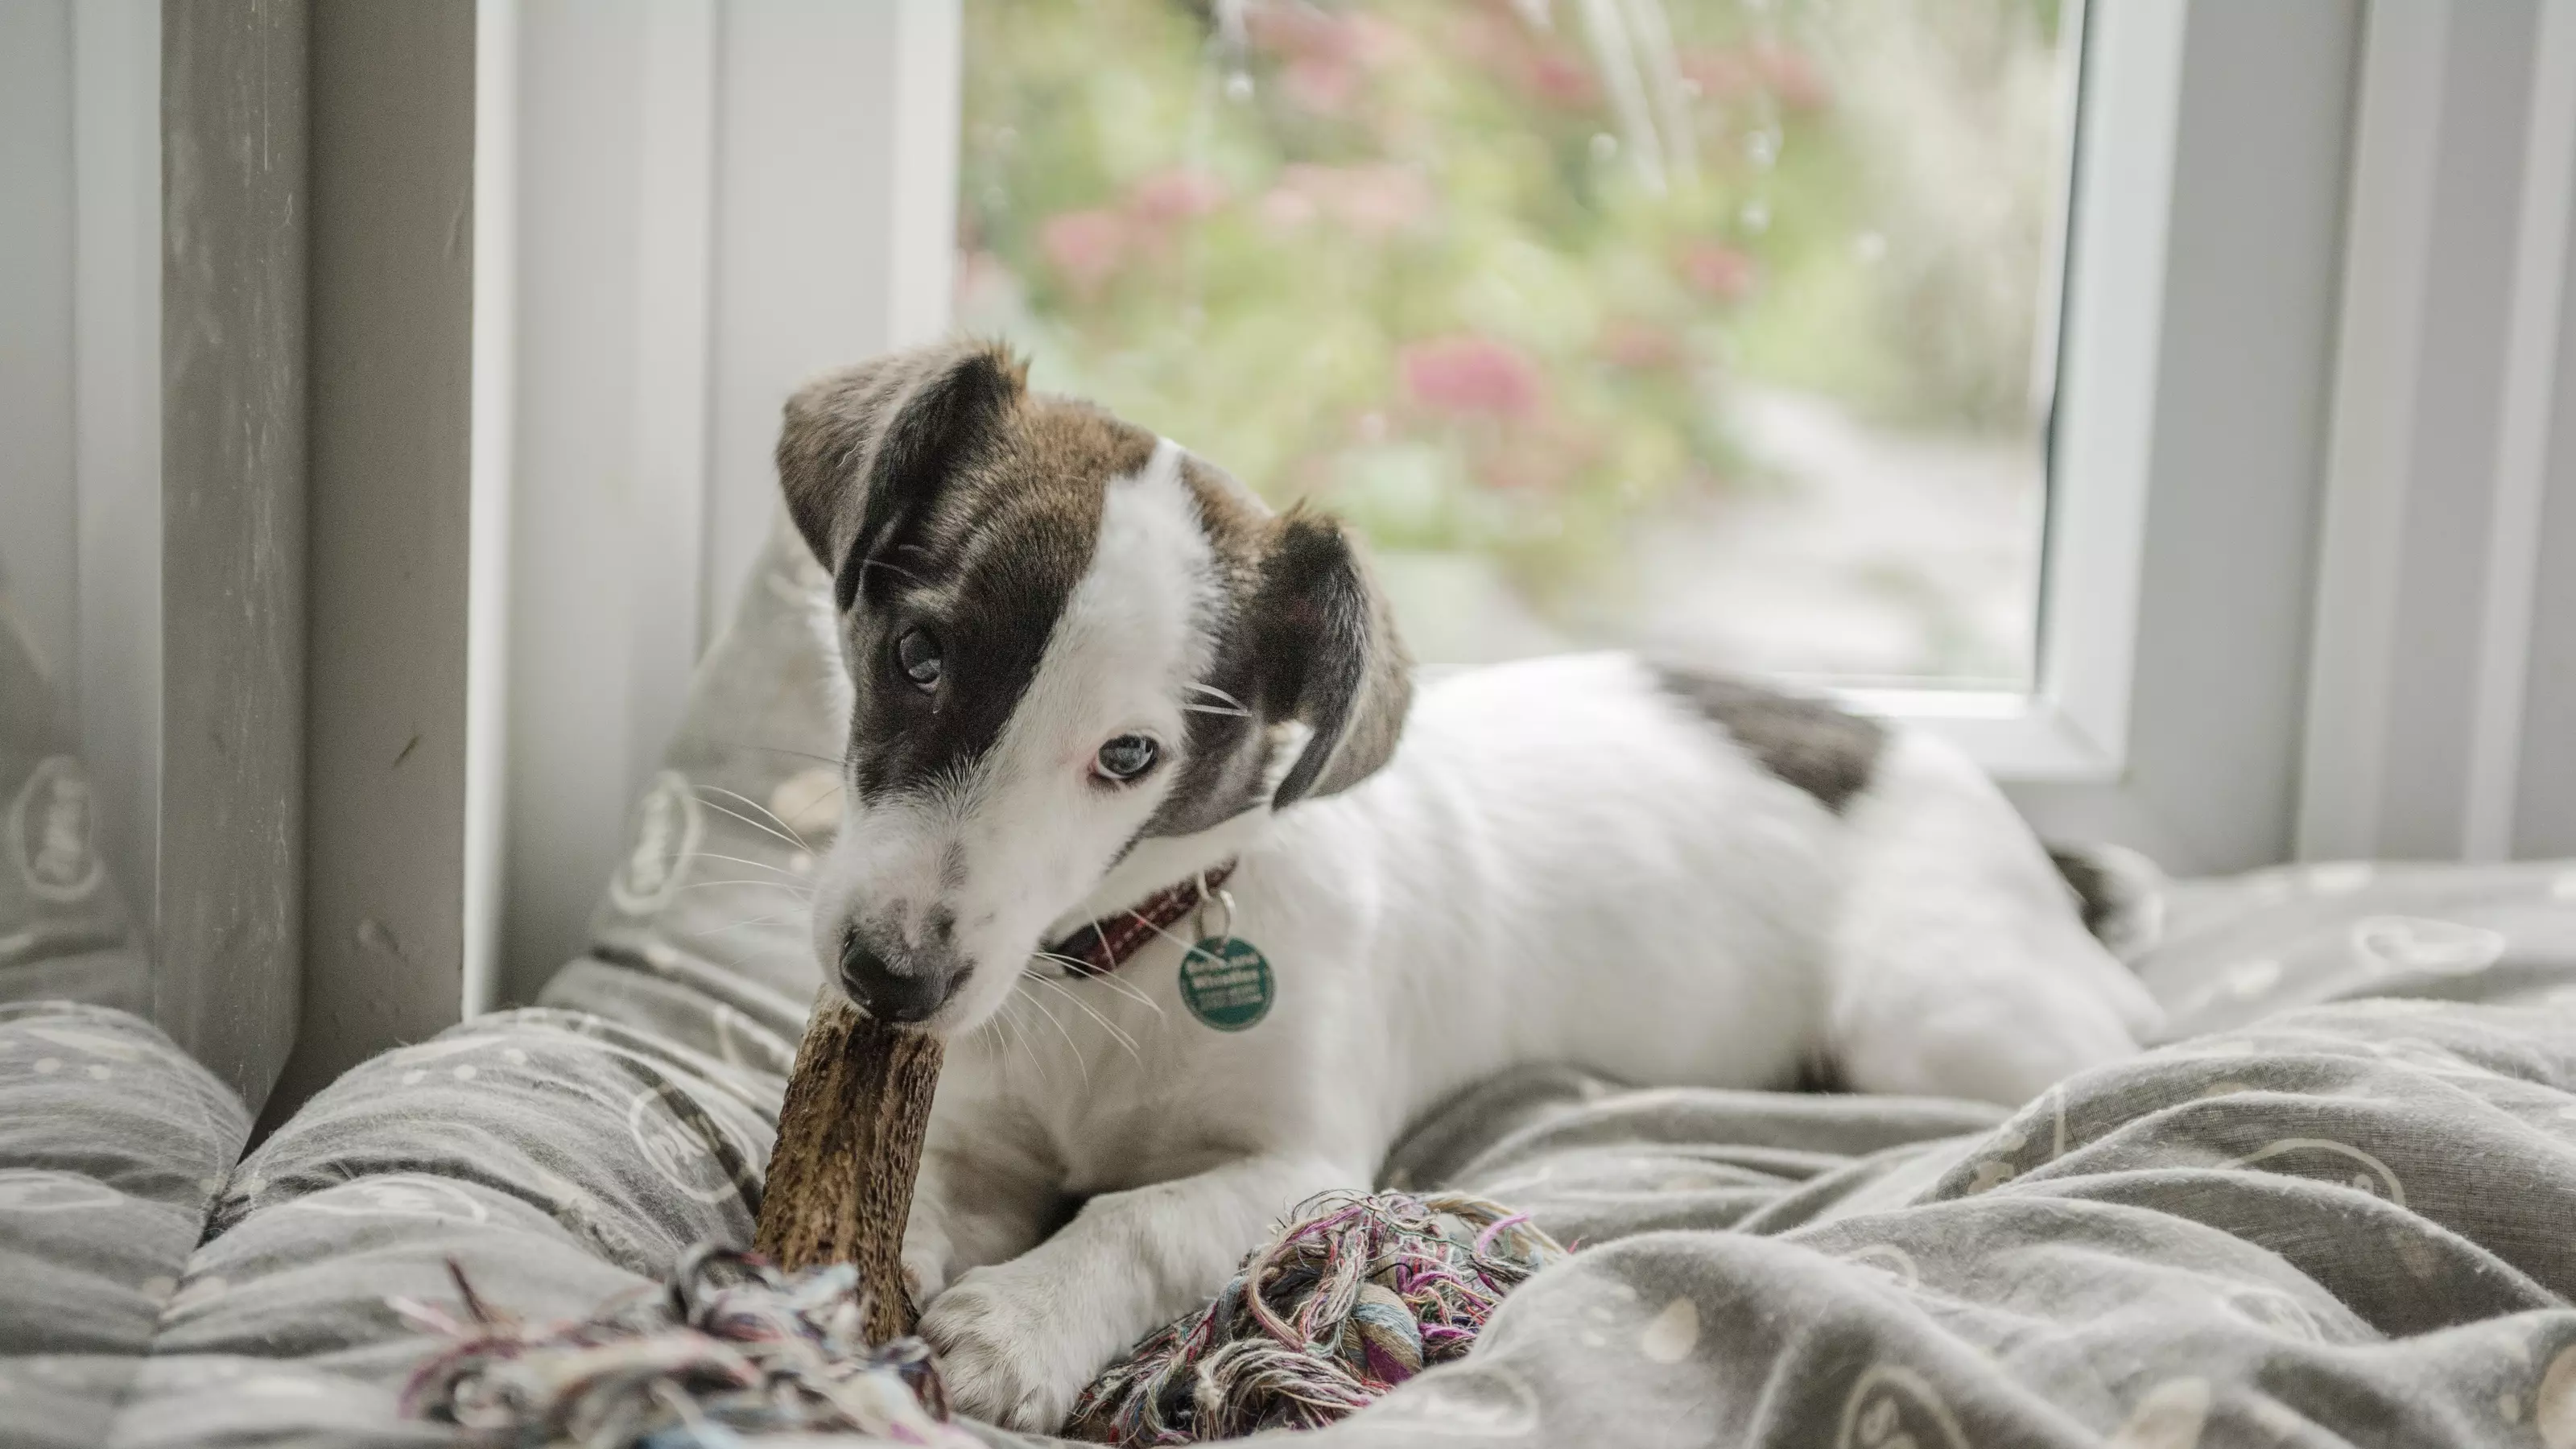 A terrier puppy chows down on a chew